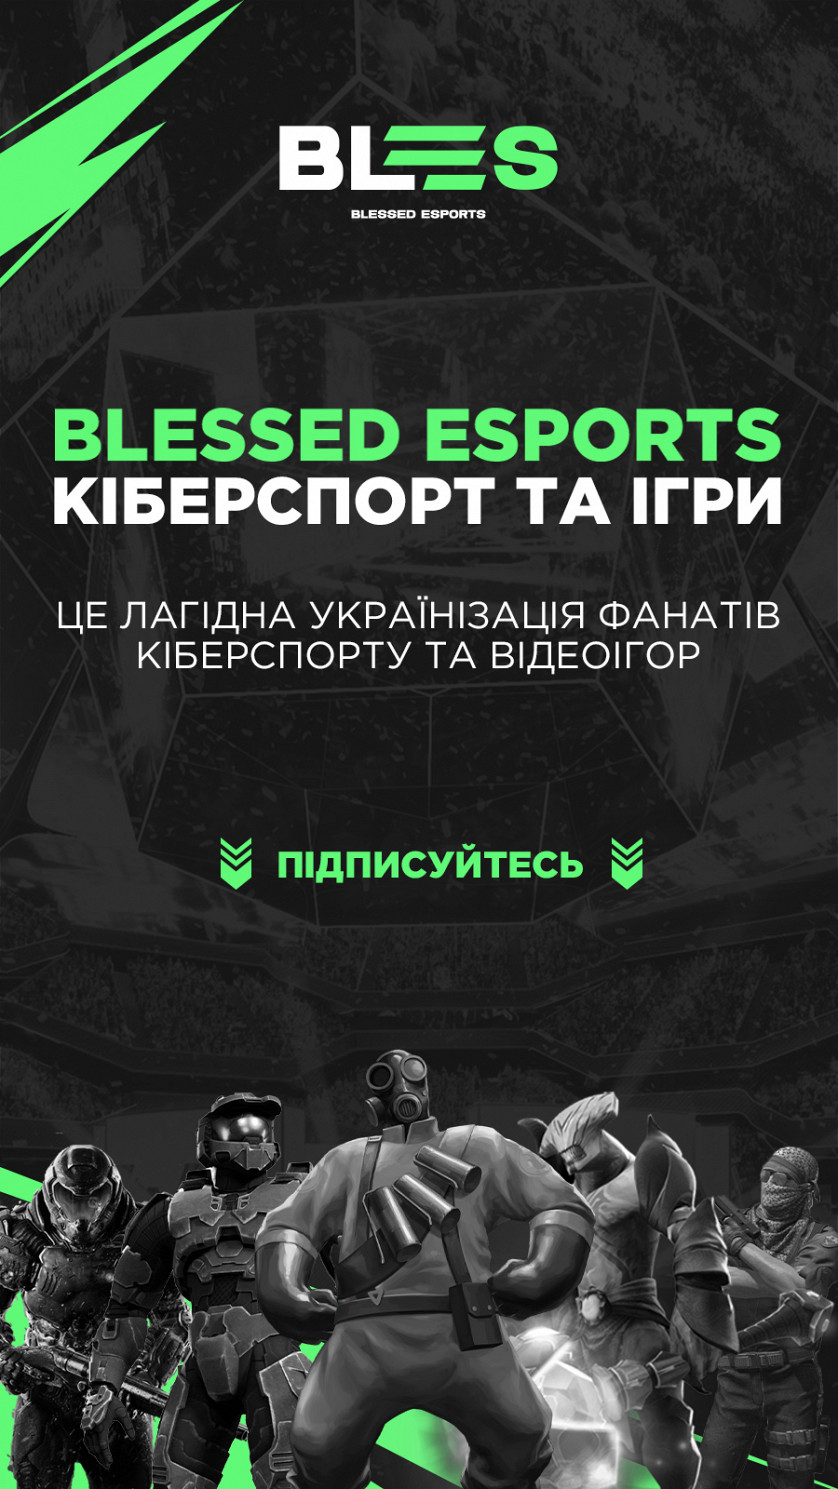 Blessed Esports image 4